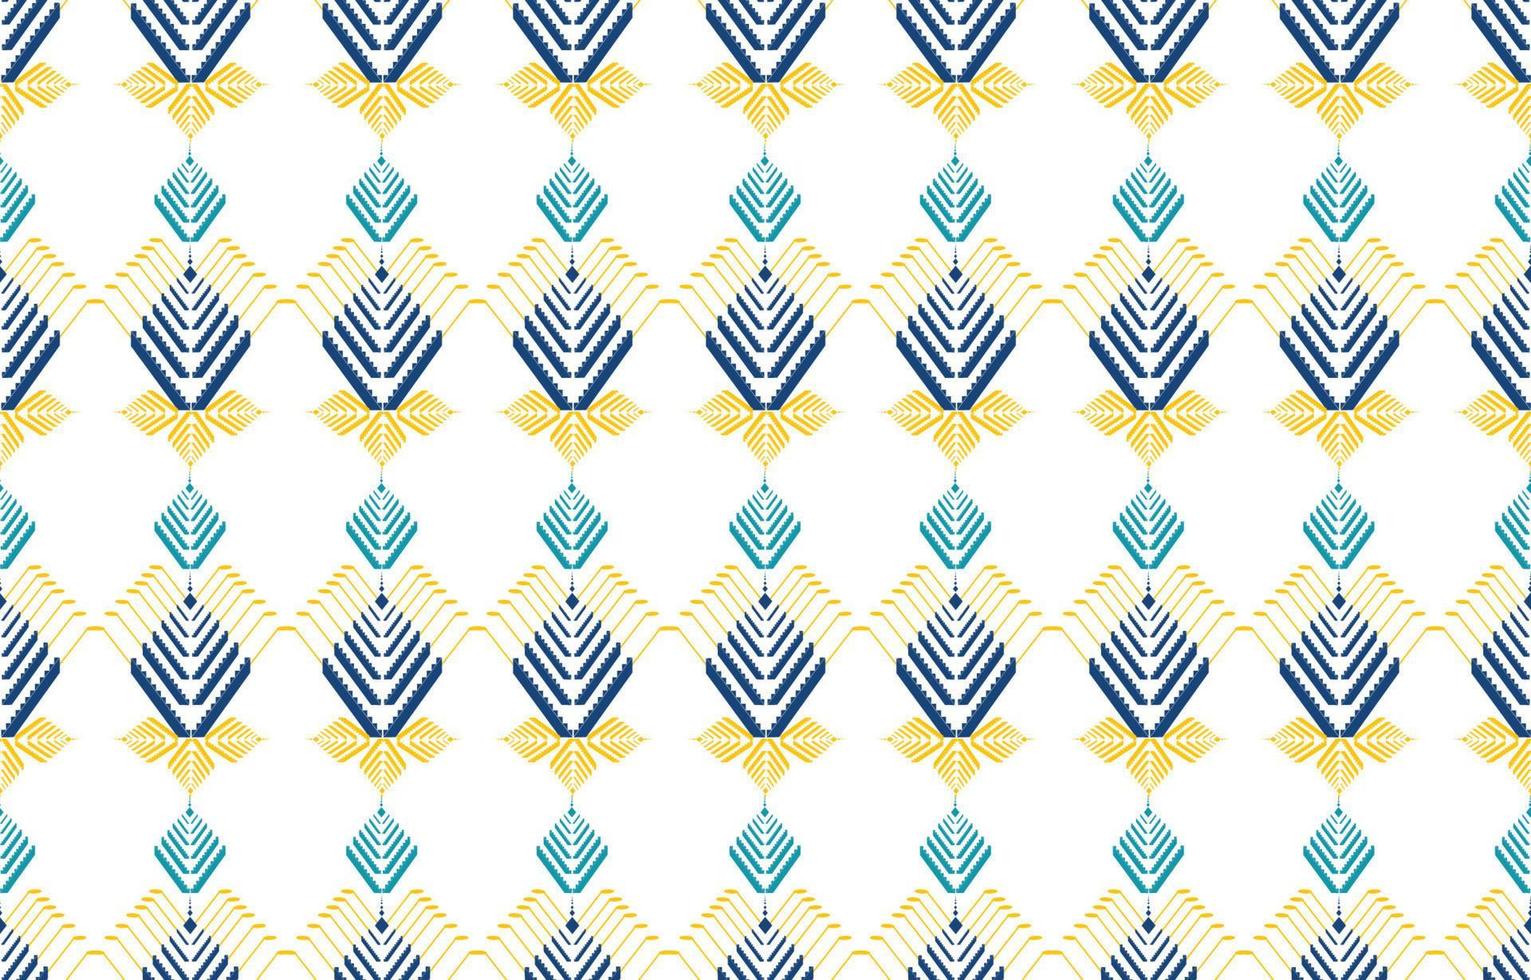 Gemetric ethnic oriental pattern. Traditional sealess pattern cool color tone. Design for background,carpet,wallpaper,clothing,wrapping,batic,fabric,print,tile,vector illustraion.embroidery style. vector